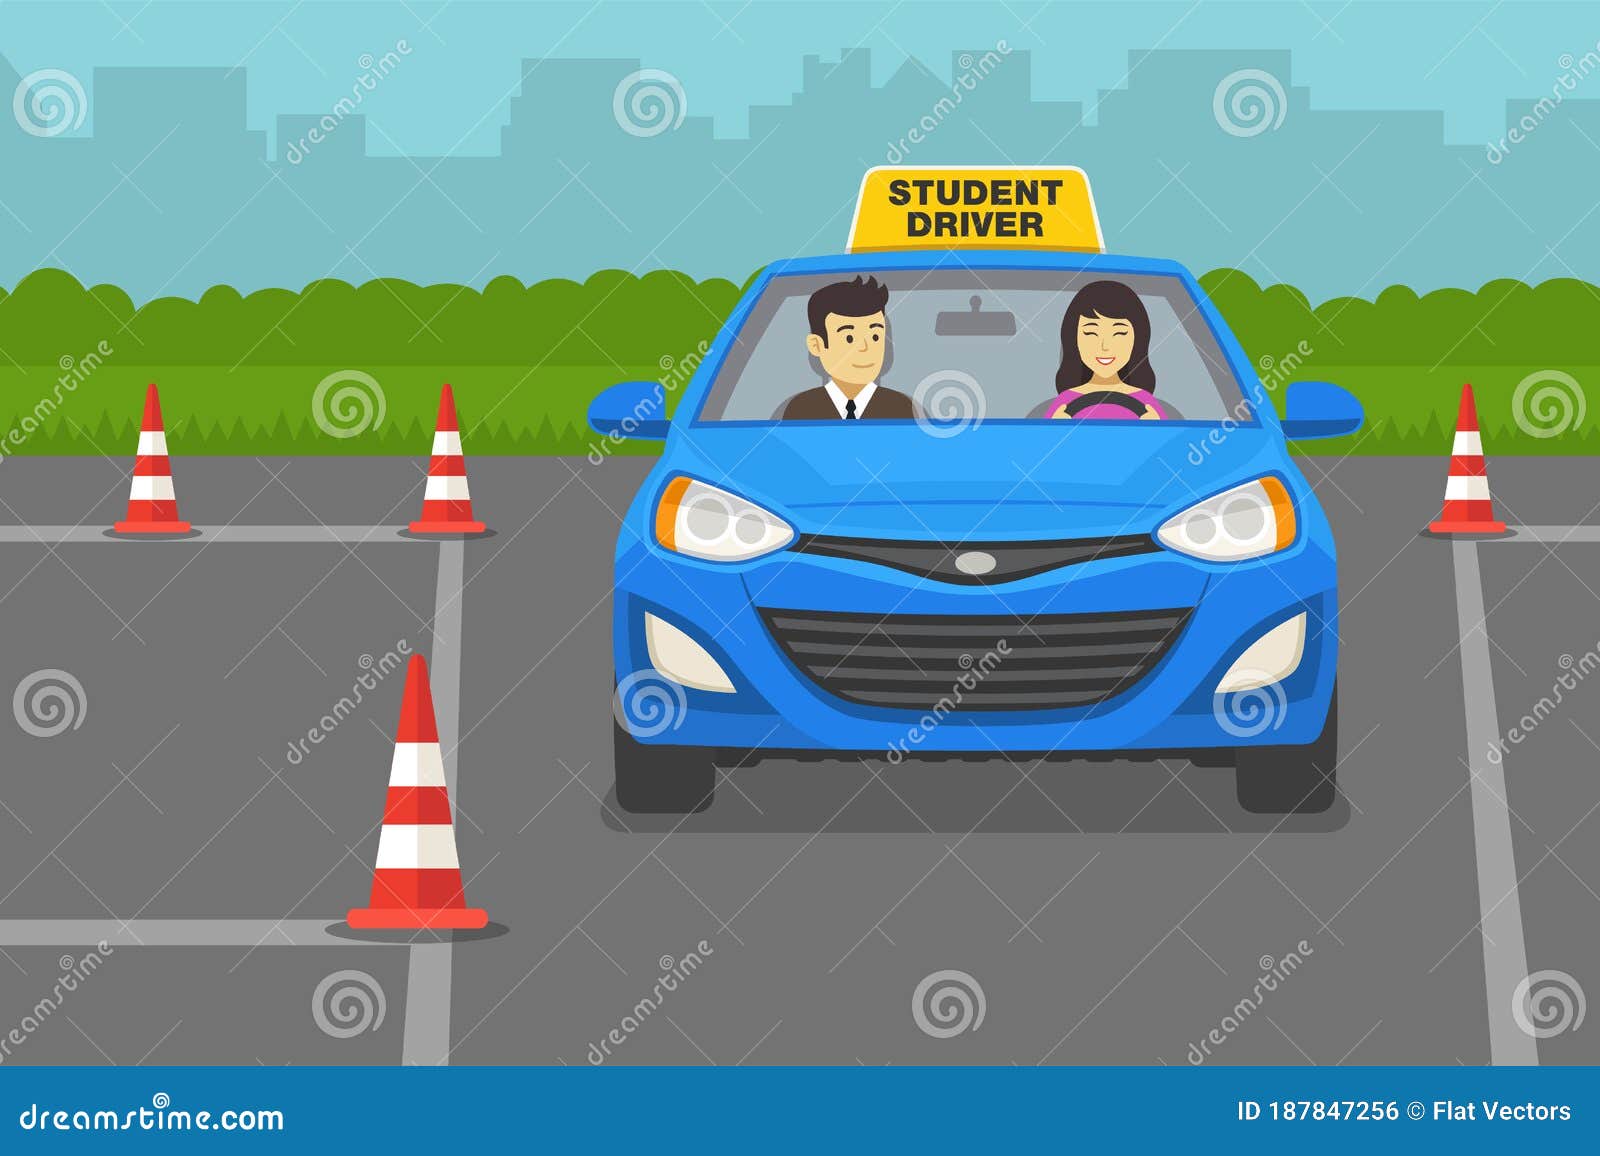 driving lesson. instructor sitting in a car next to a female student driver.